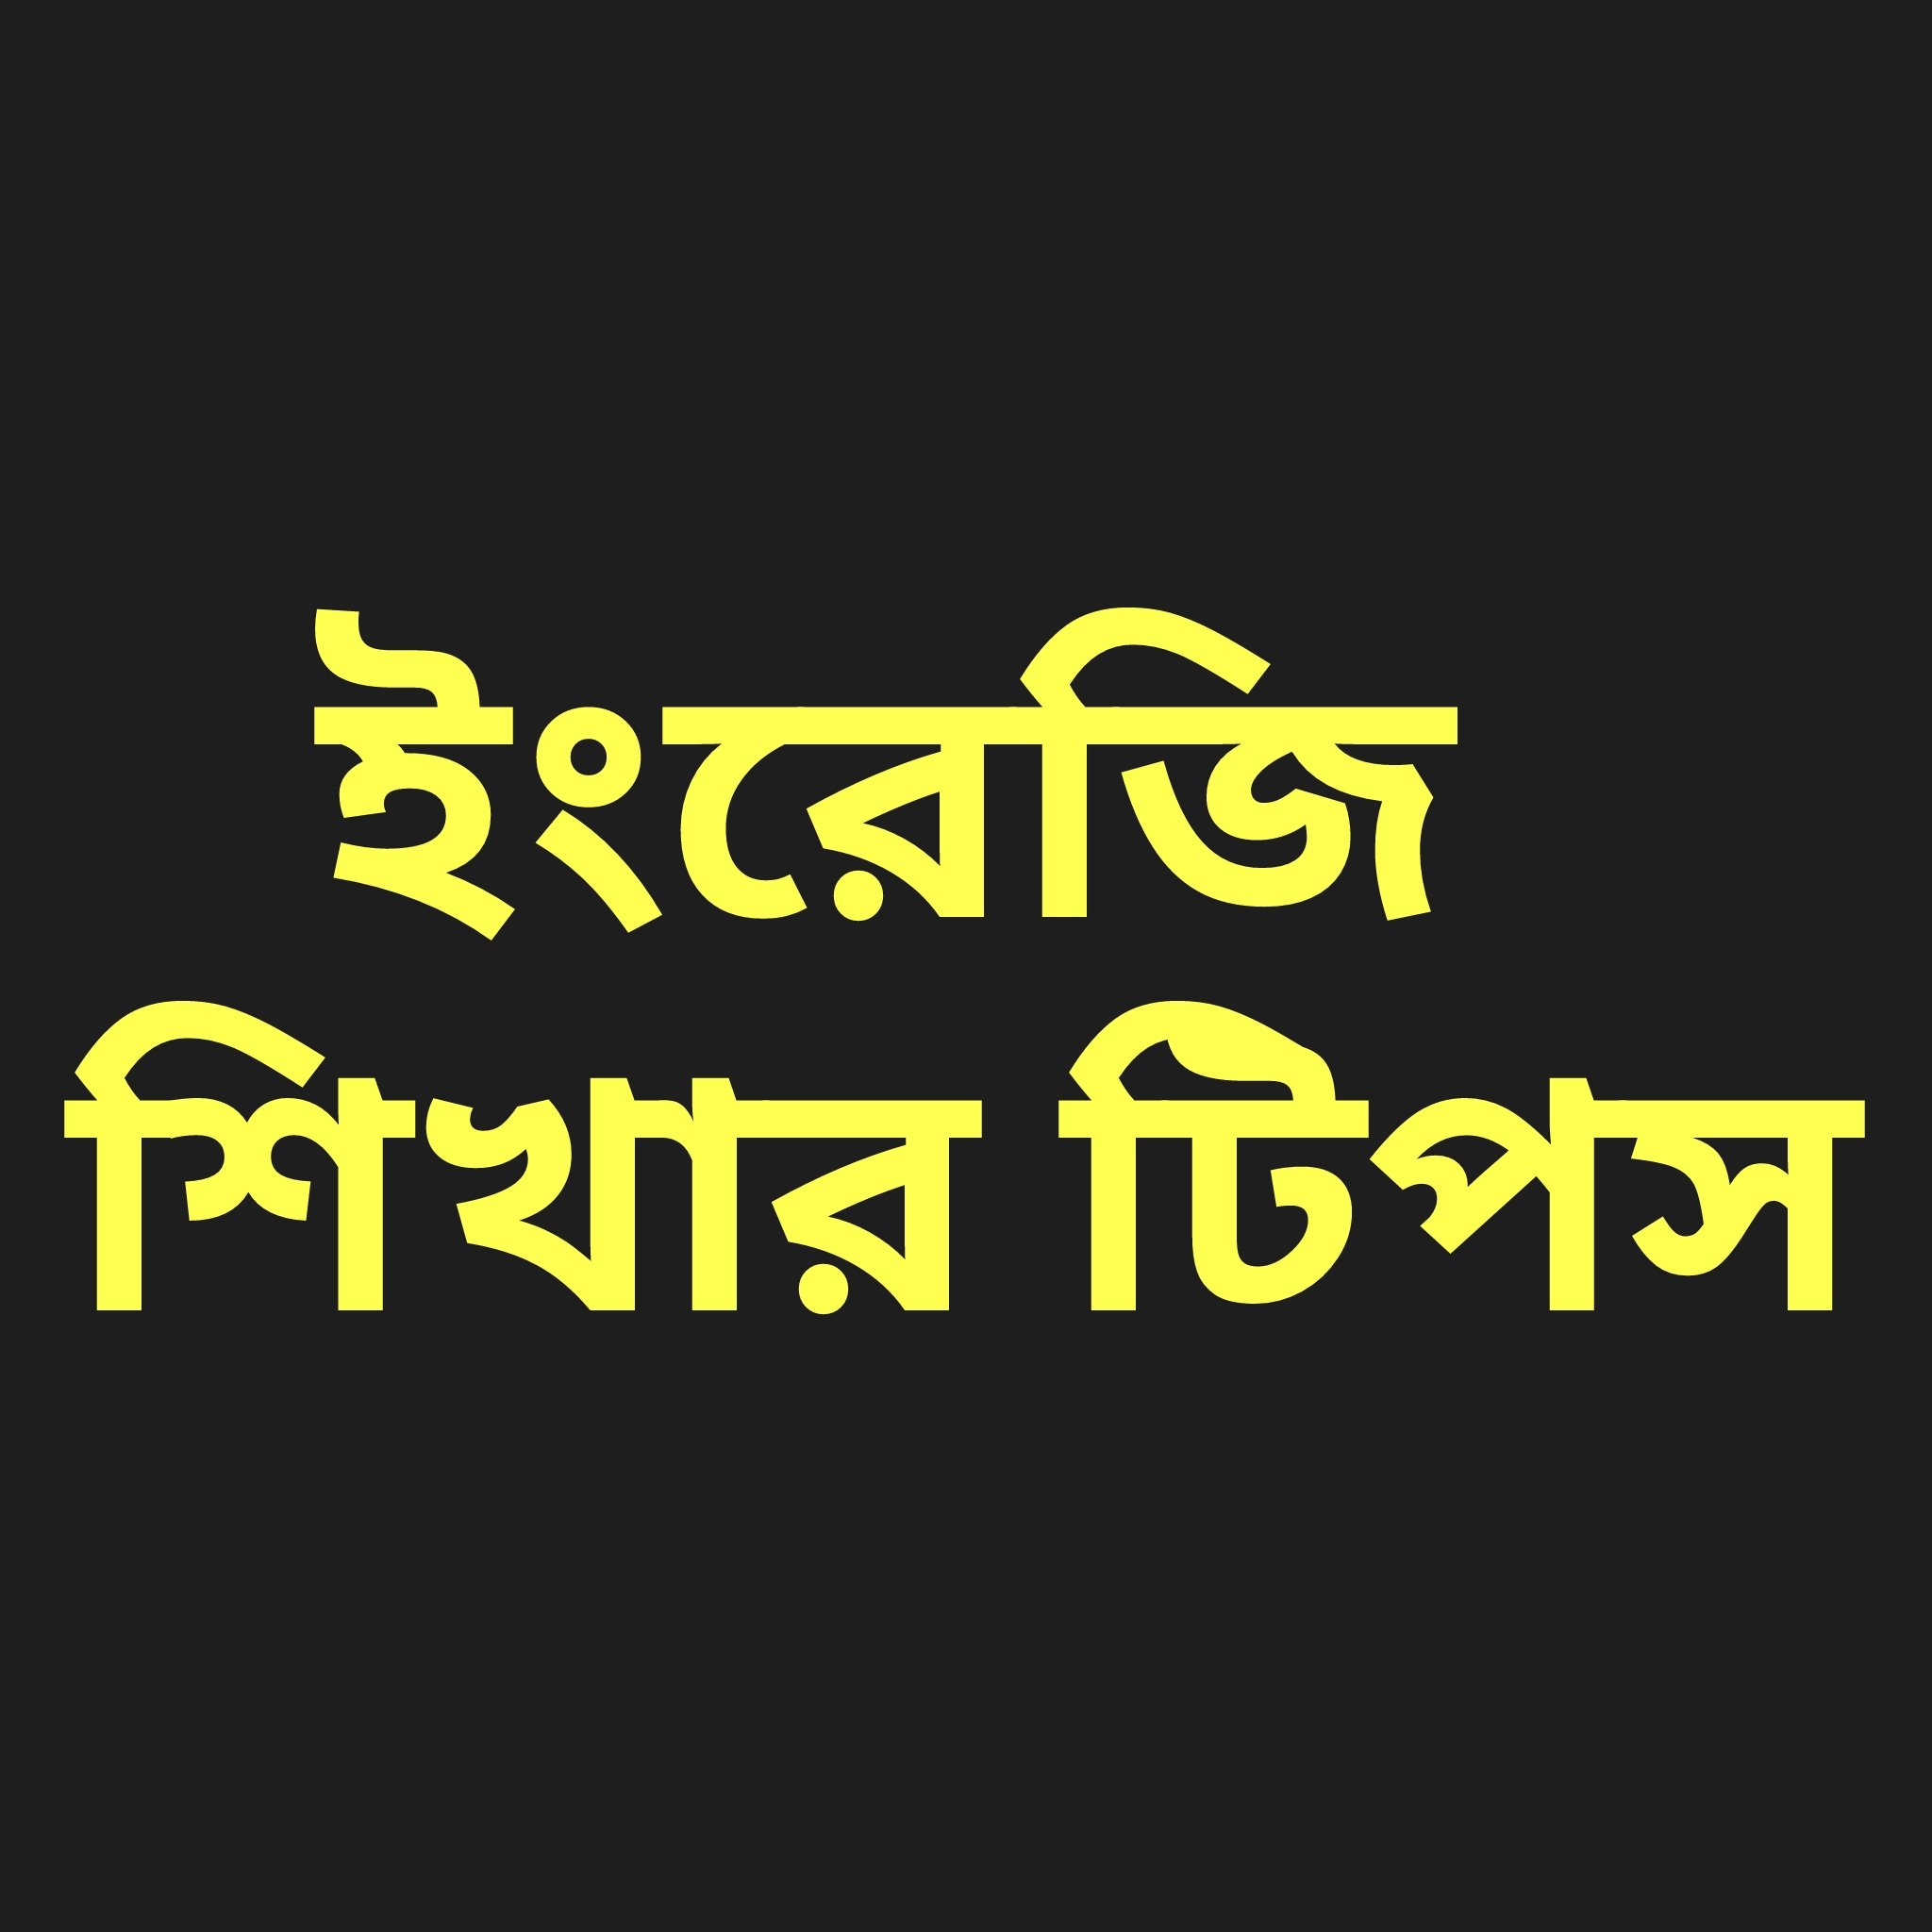 Clutches meaning in bengali / Clutches শব্দের বাংলা